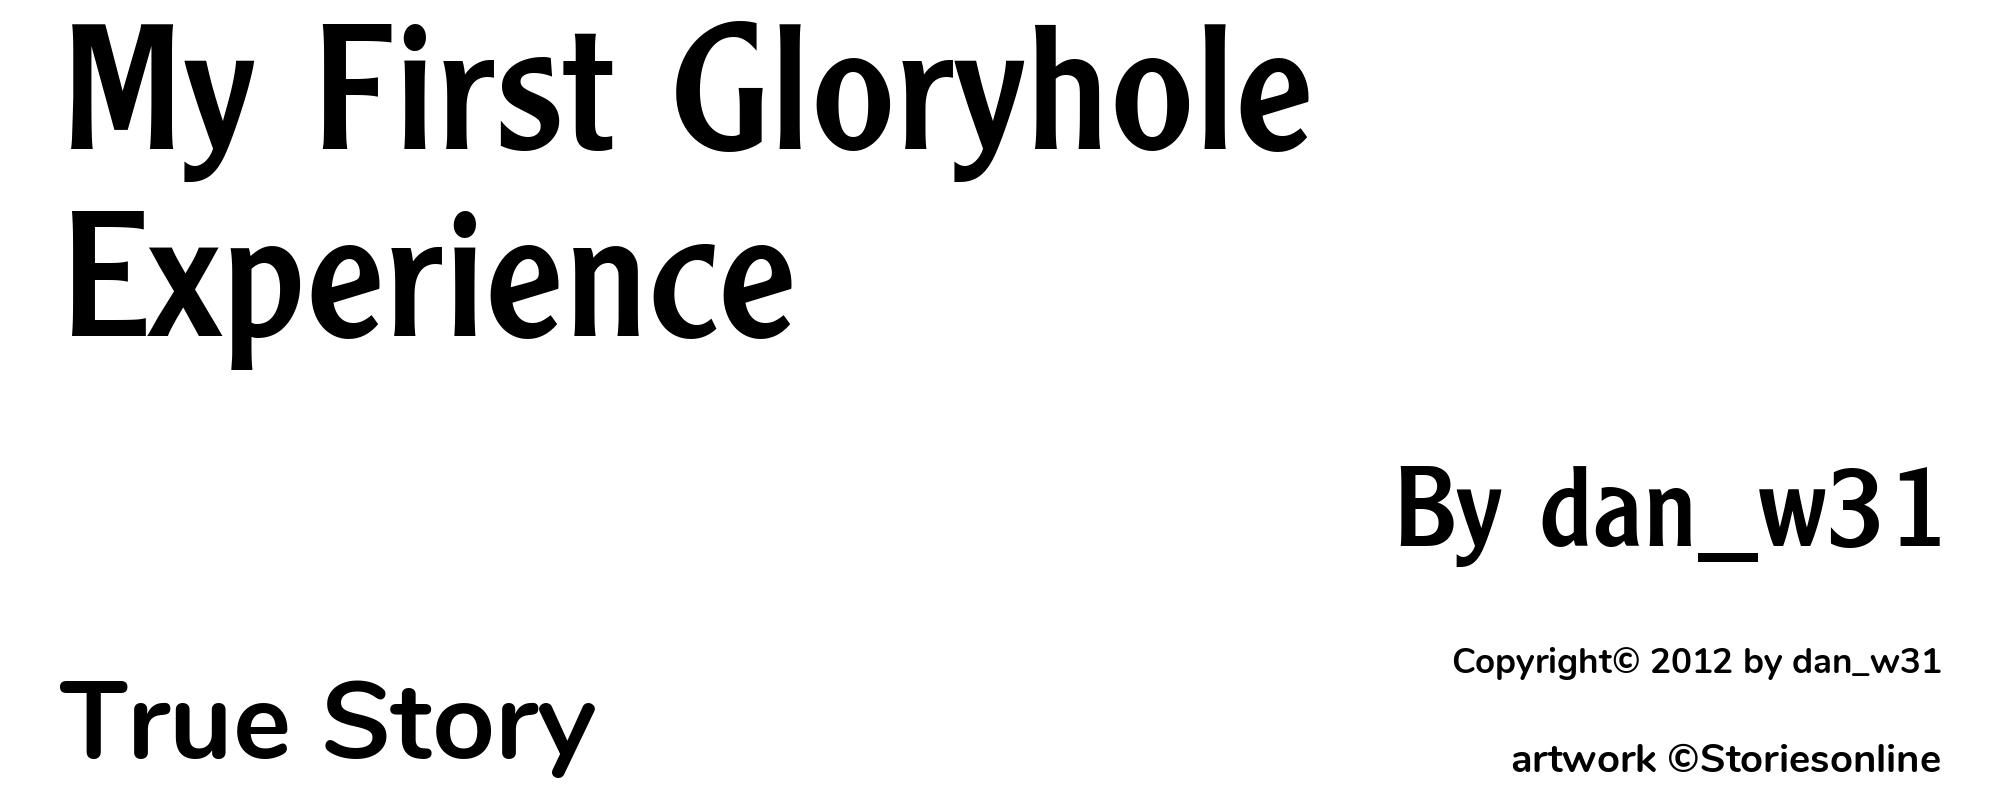 My First Gloryhole Experience - Cover